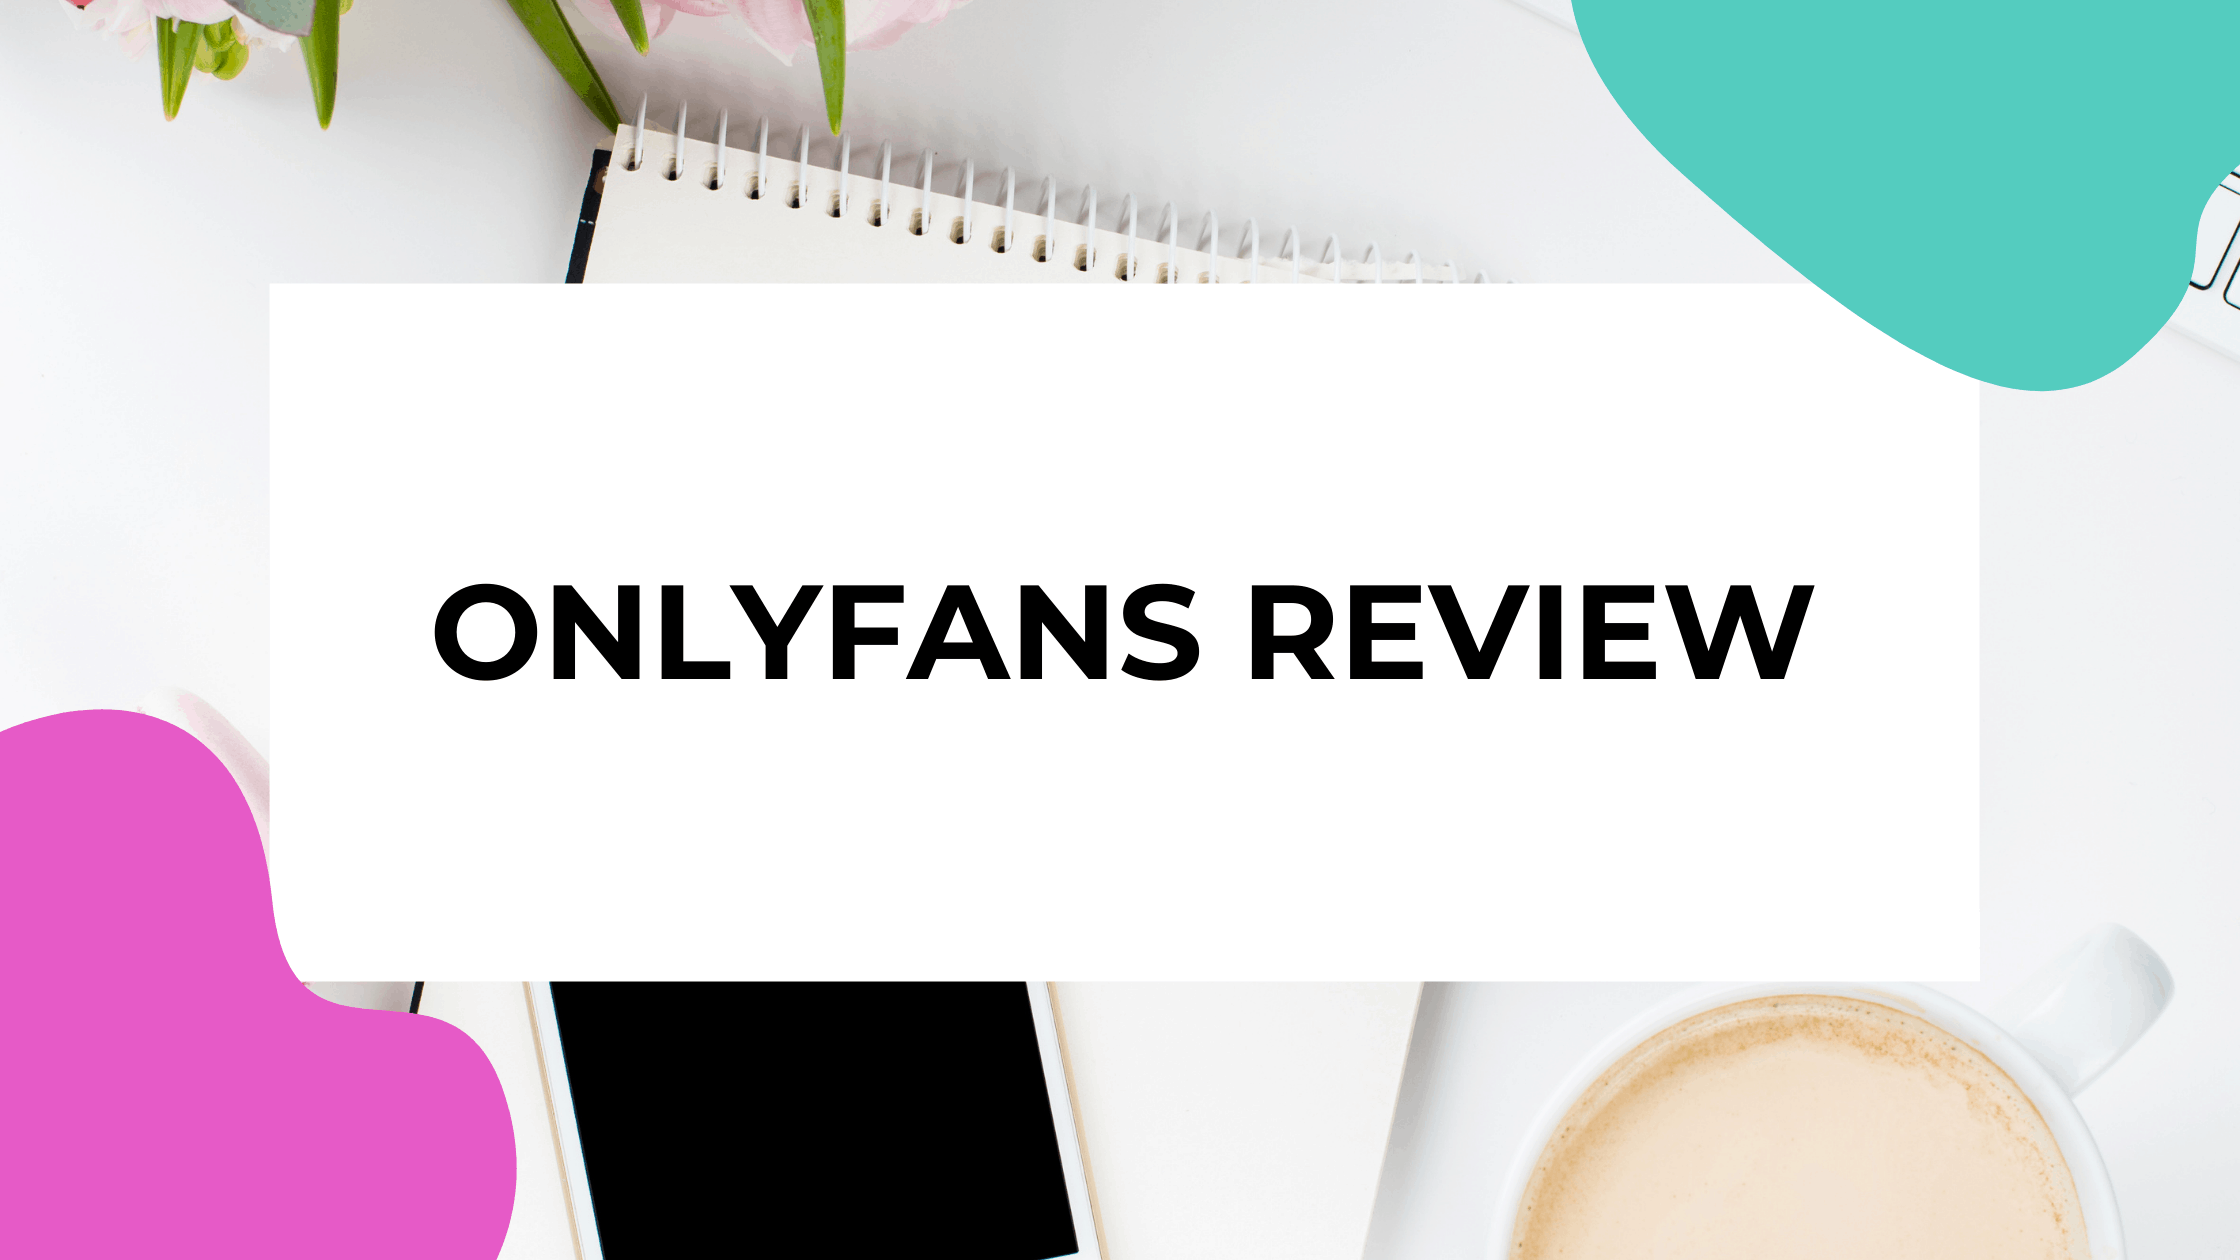 In this OnlyFans review, learn how to make money on OnlyFans and how to mak...